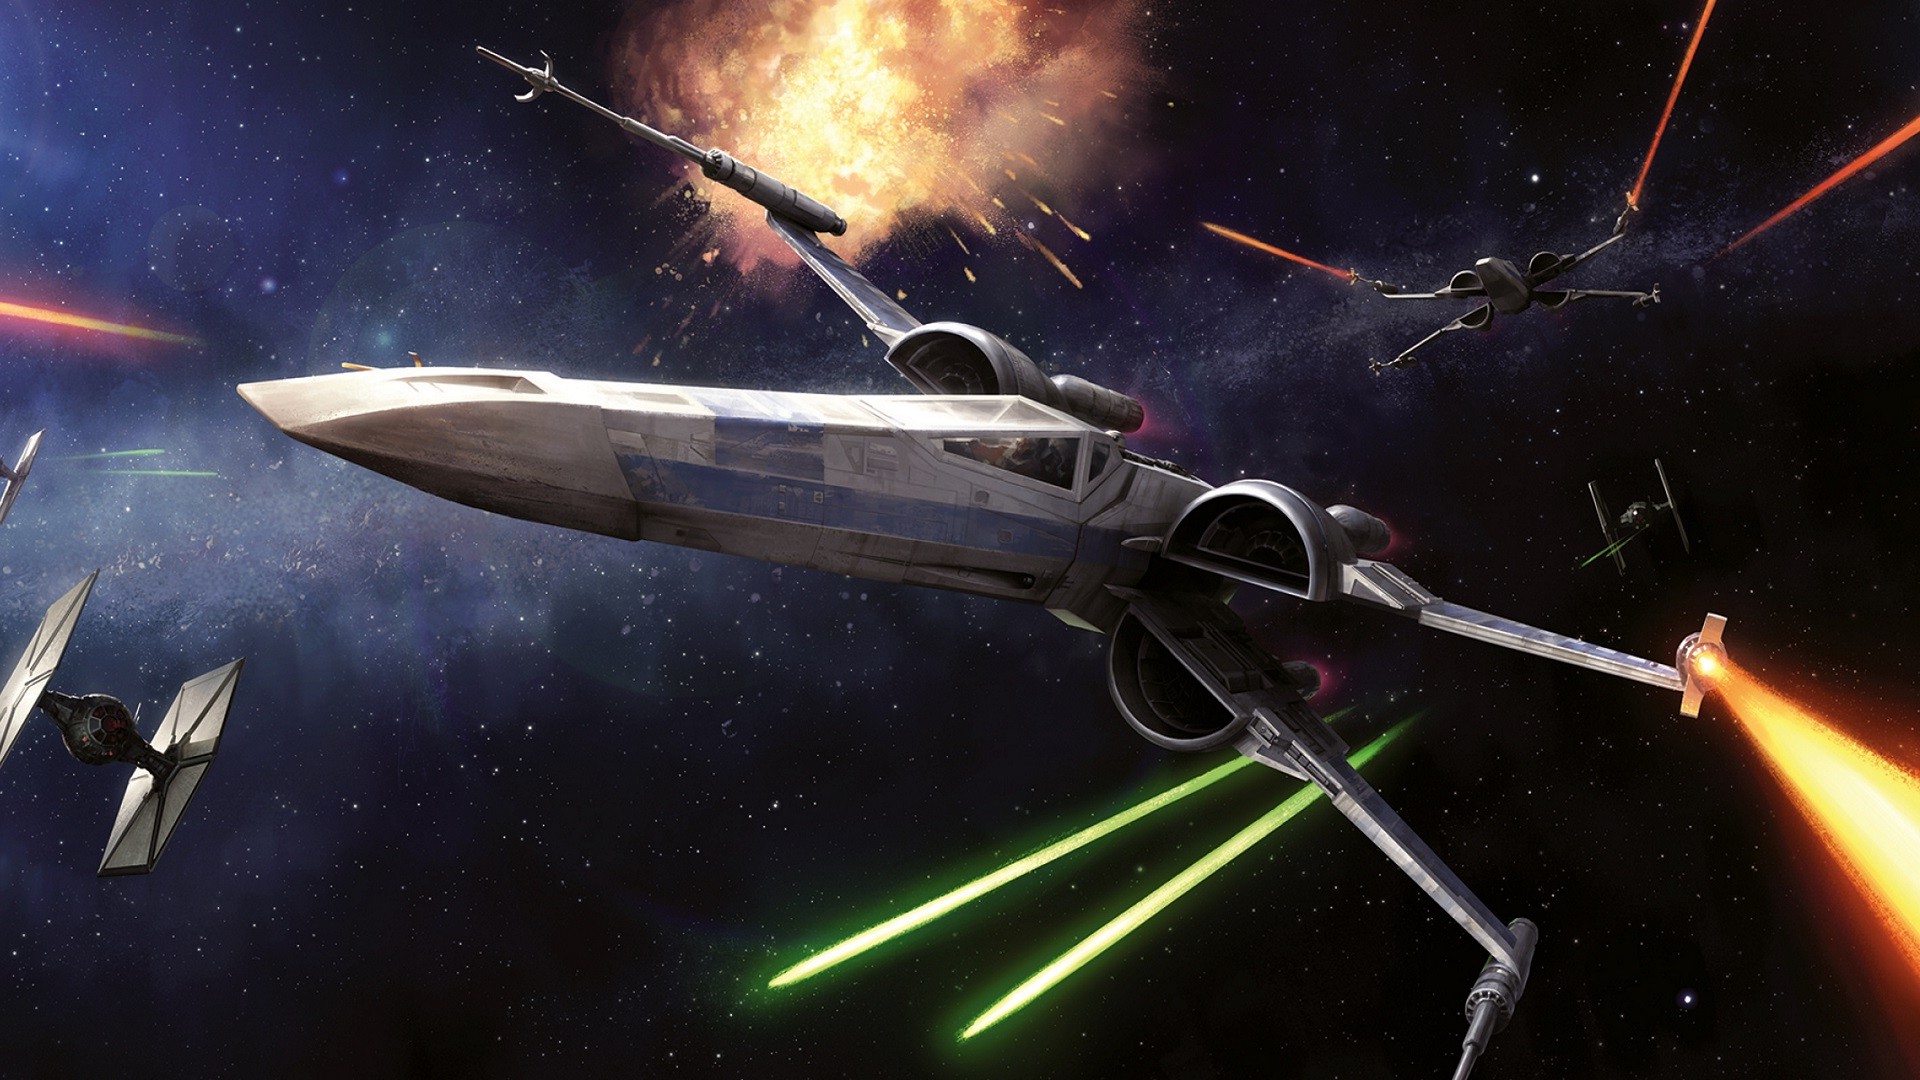 star wars space wallpaper,outer space,strategy video game,space,spacecraft,vehicle